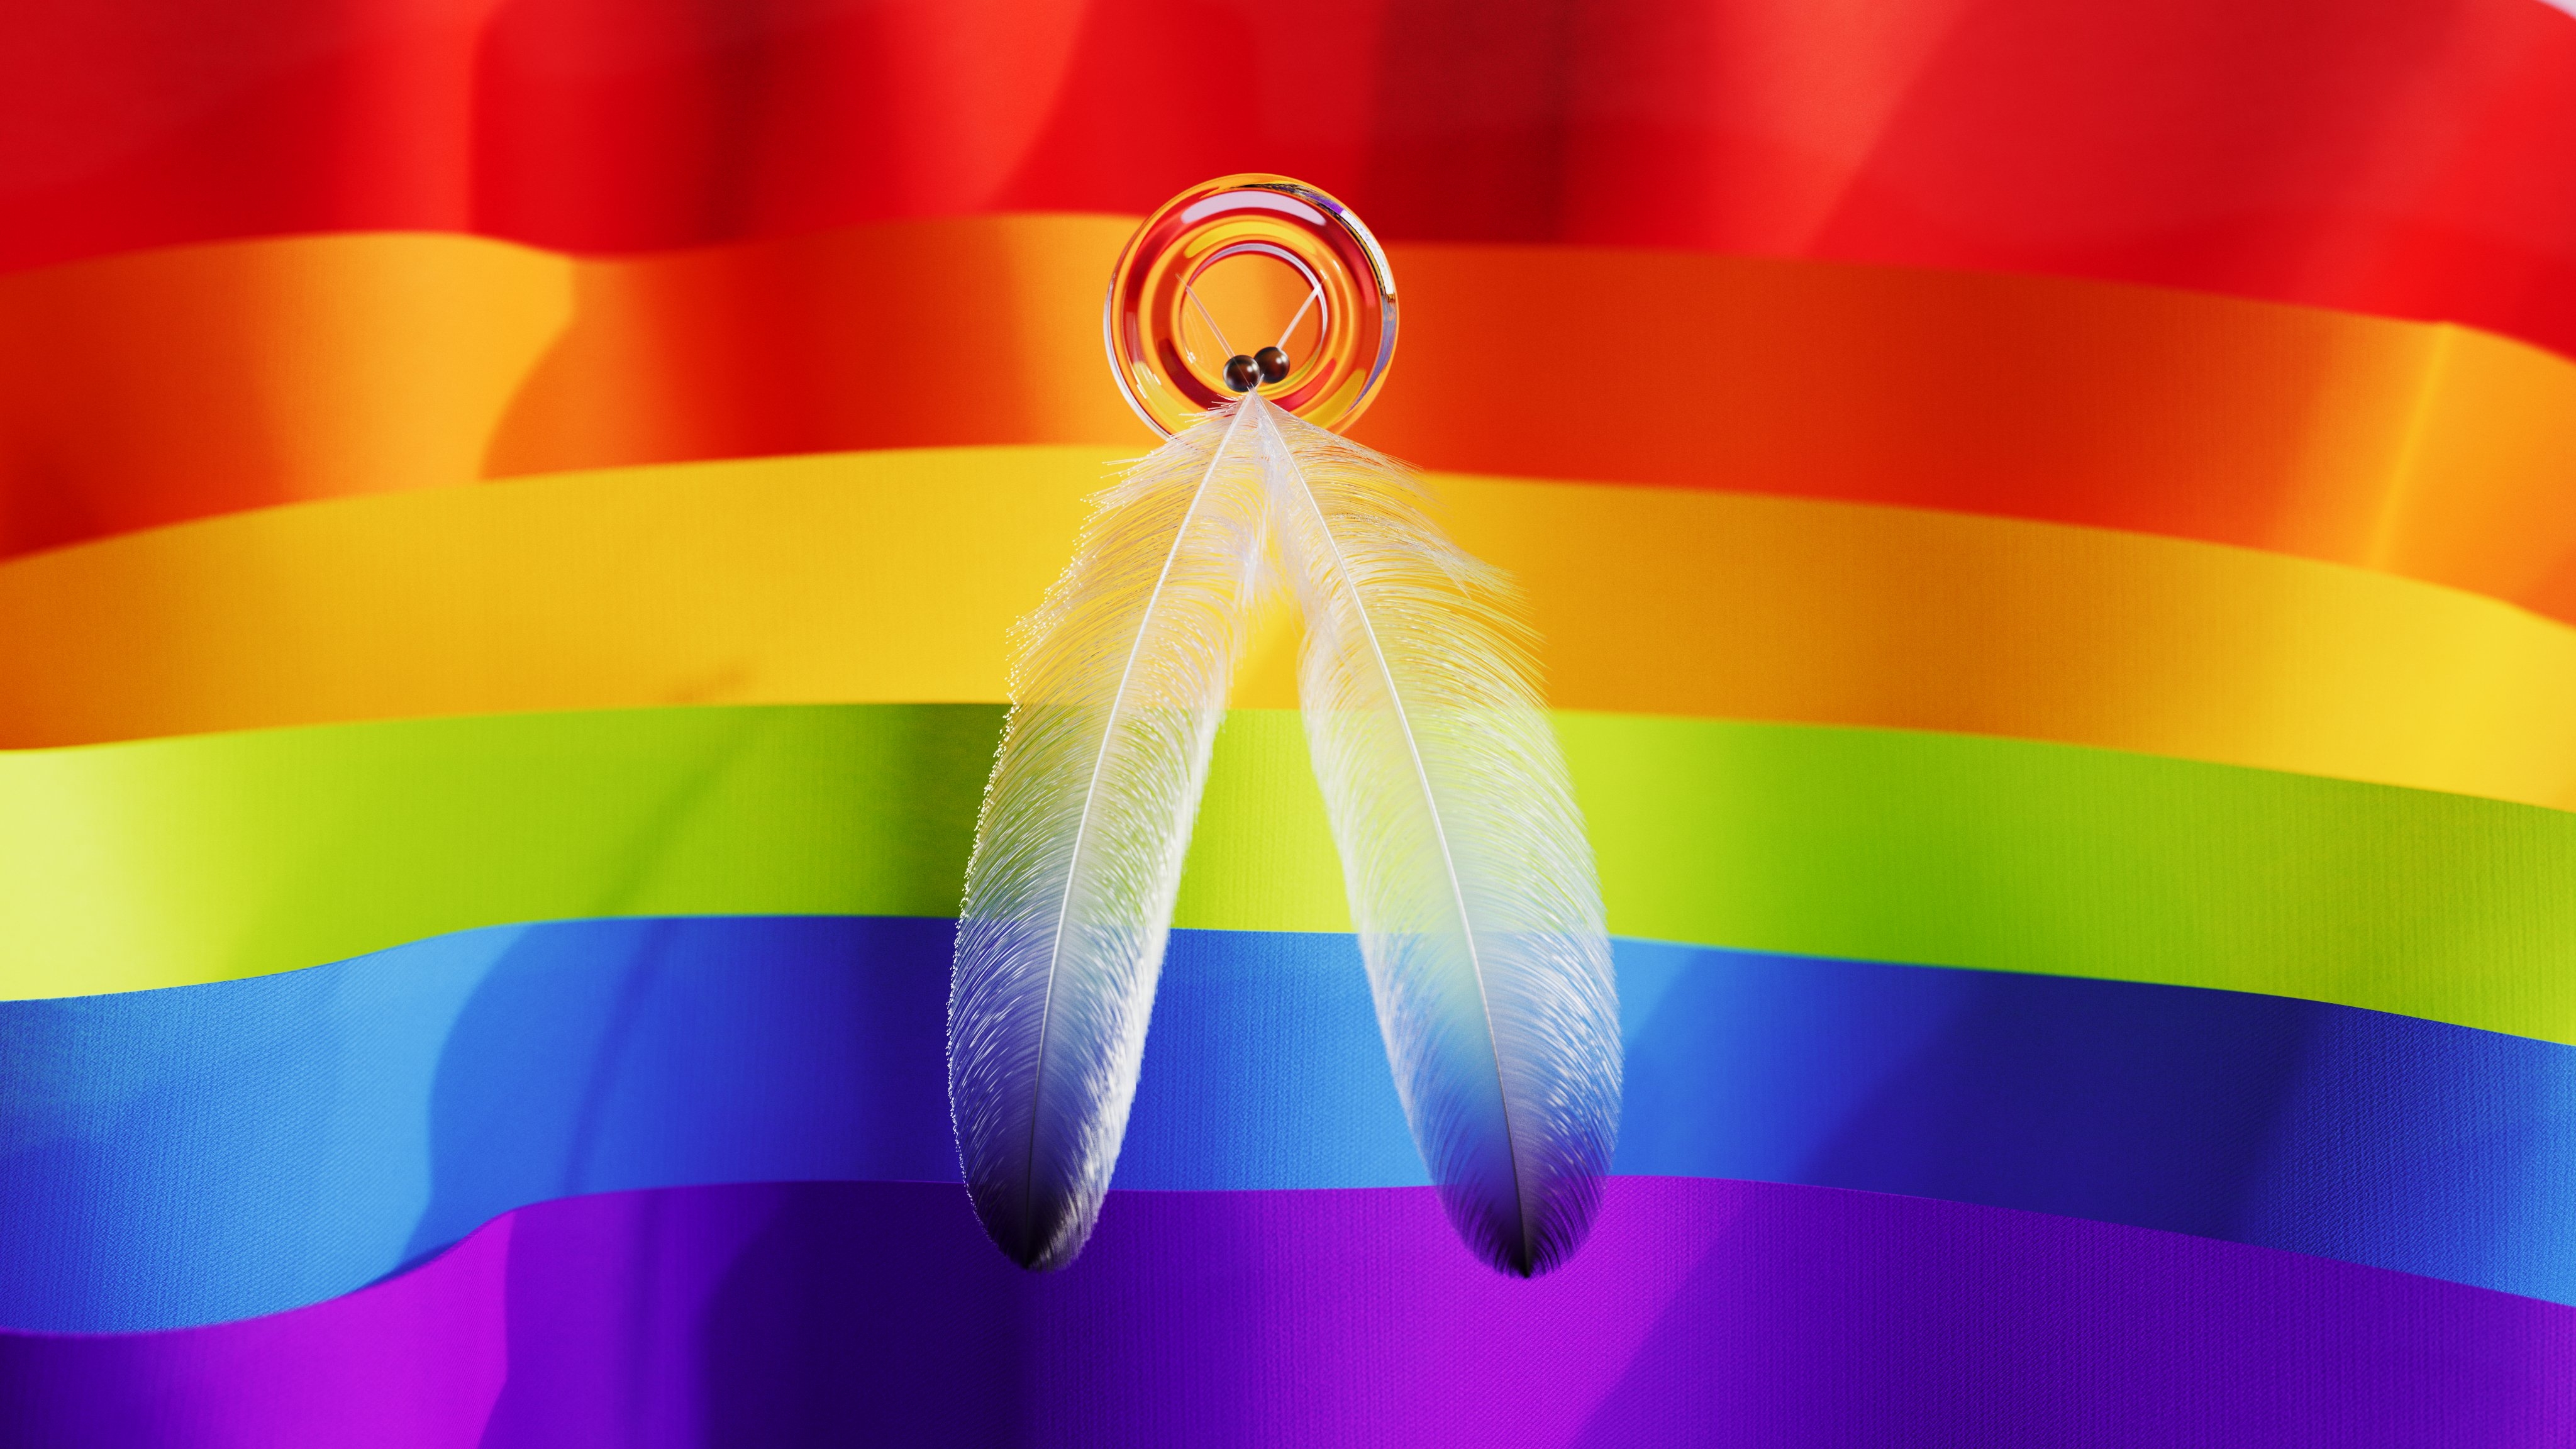 HD wallpaper, Pride, Lgbtq, Rainbow, Colorful Background, Ribbons, Feathers